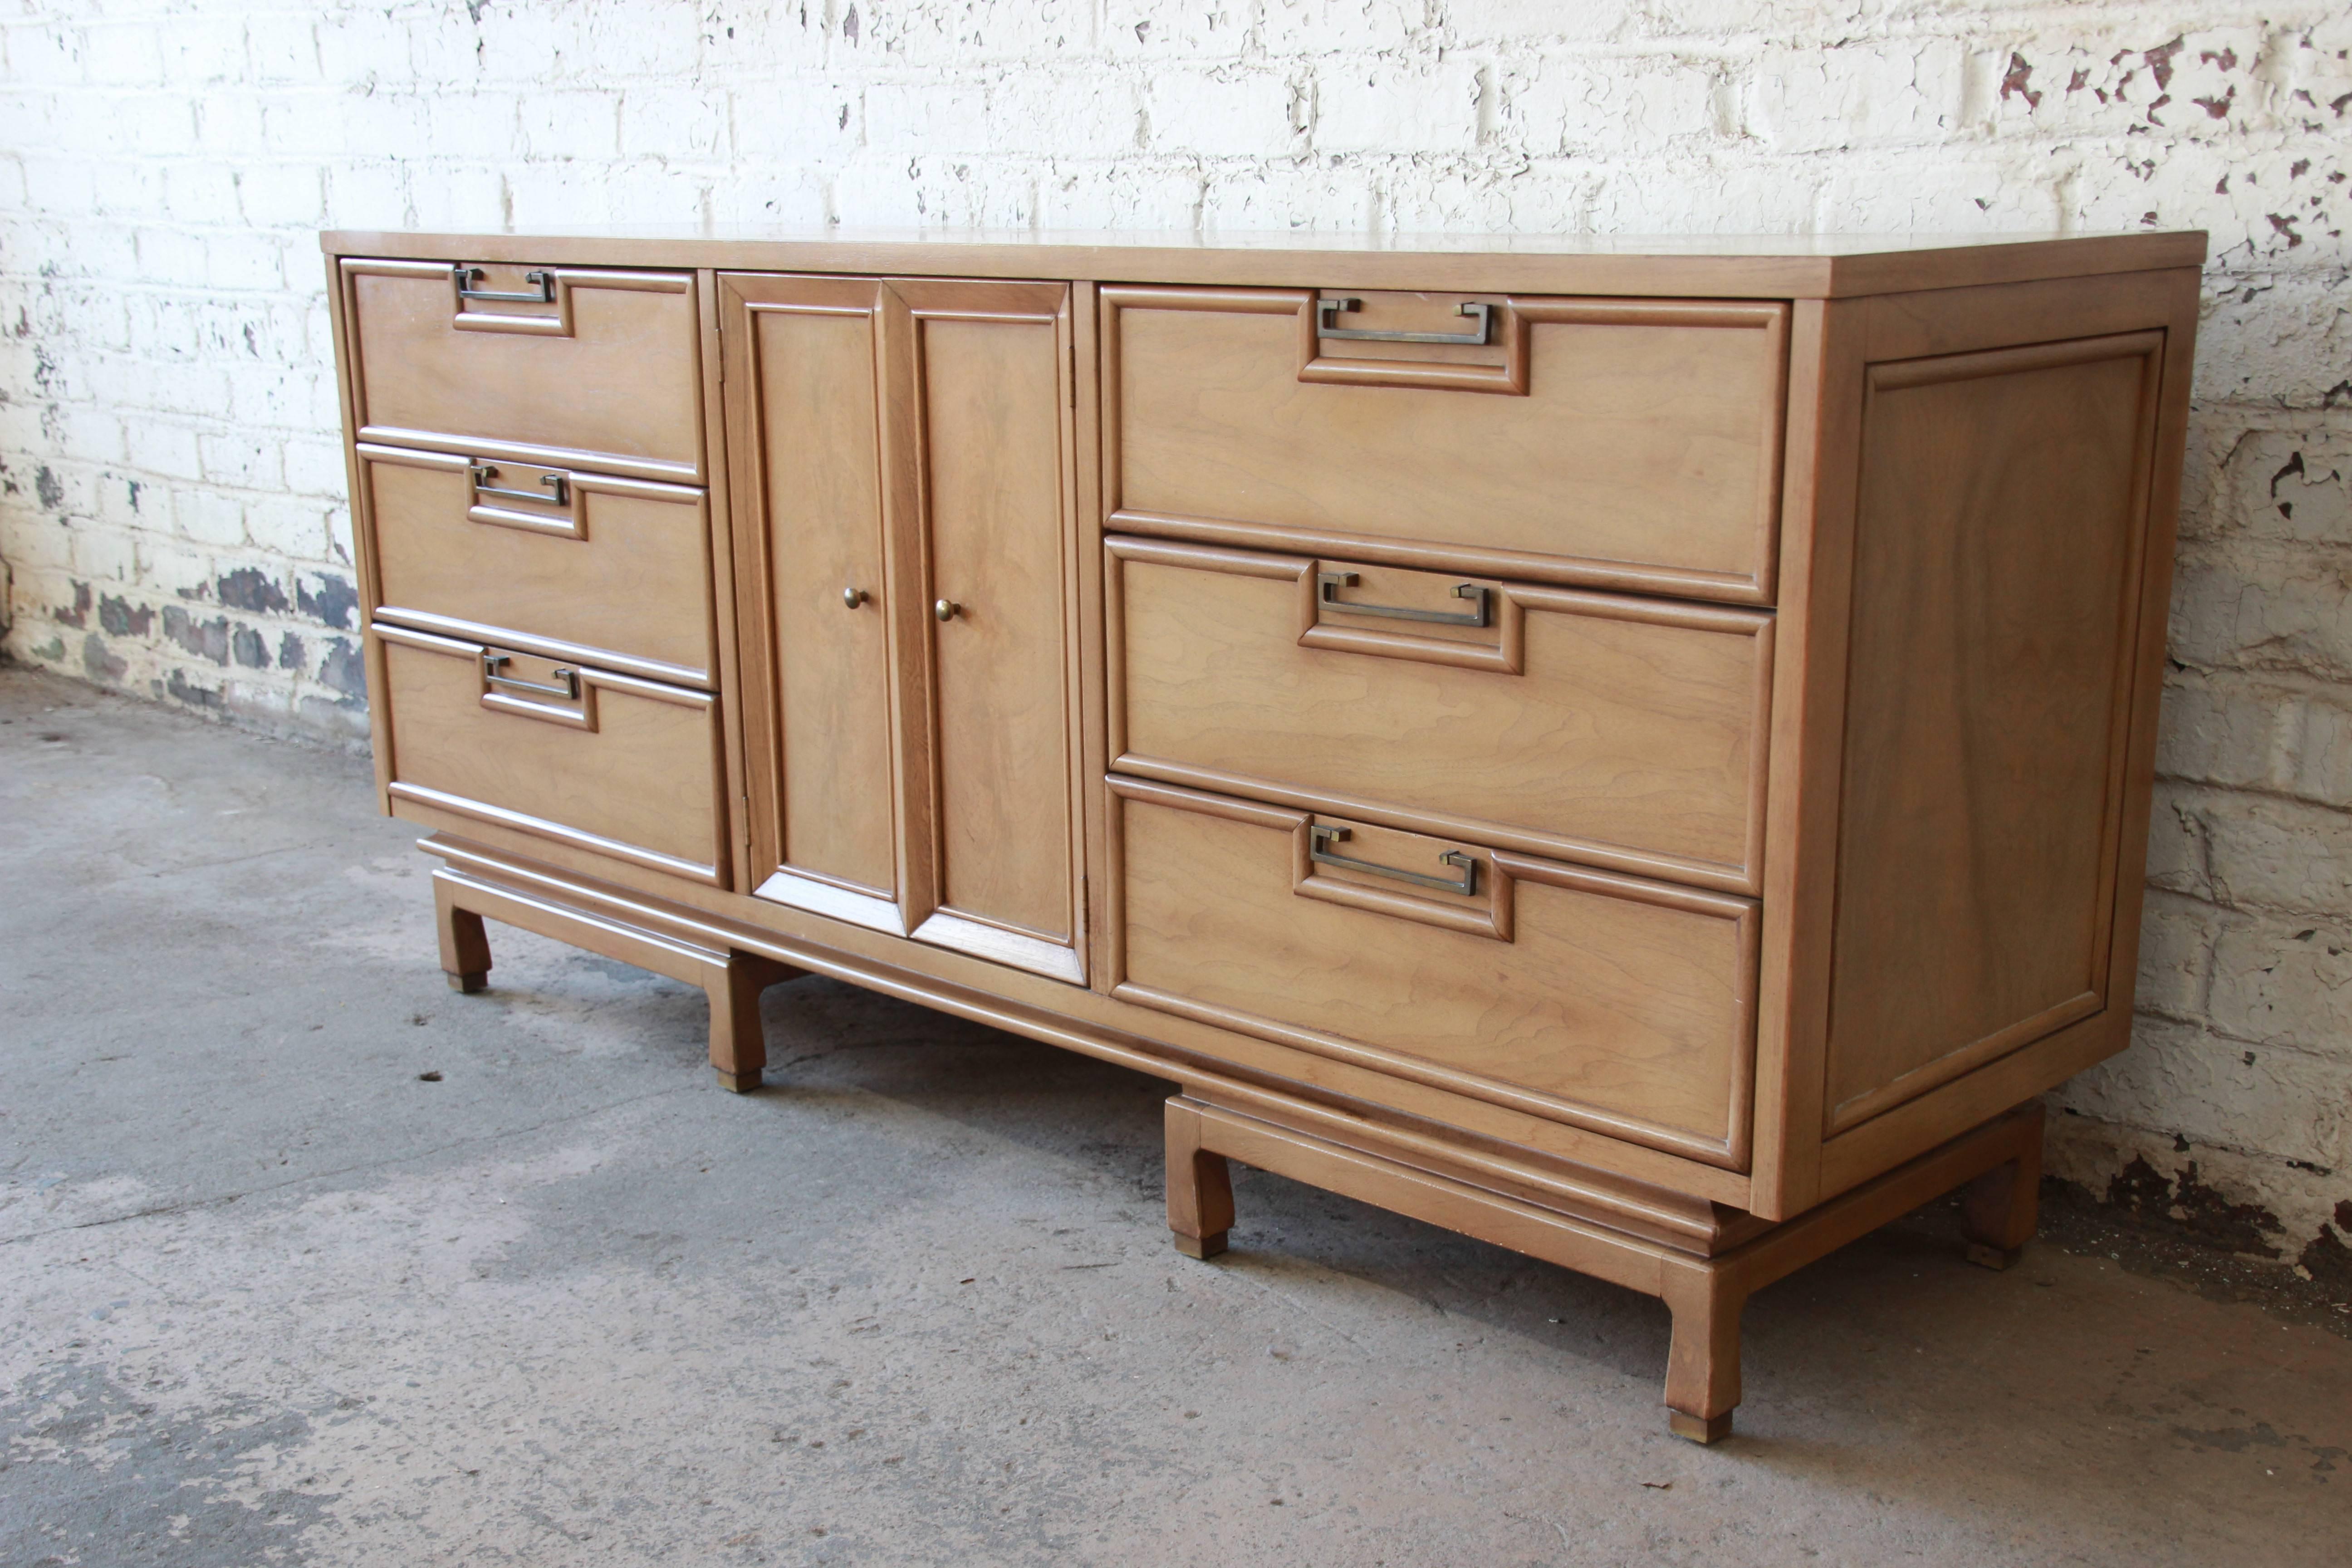 An exceptional Mid-Century Modern Hollywood Regency Chinoiserie style credenza or triple dresser by Merton Gershun for American of Martinsville. This stunning piece features sleek Mid-Century Modern design and beautiful bleached walnut wood grain.